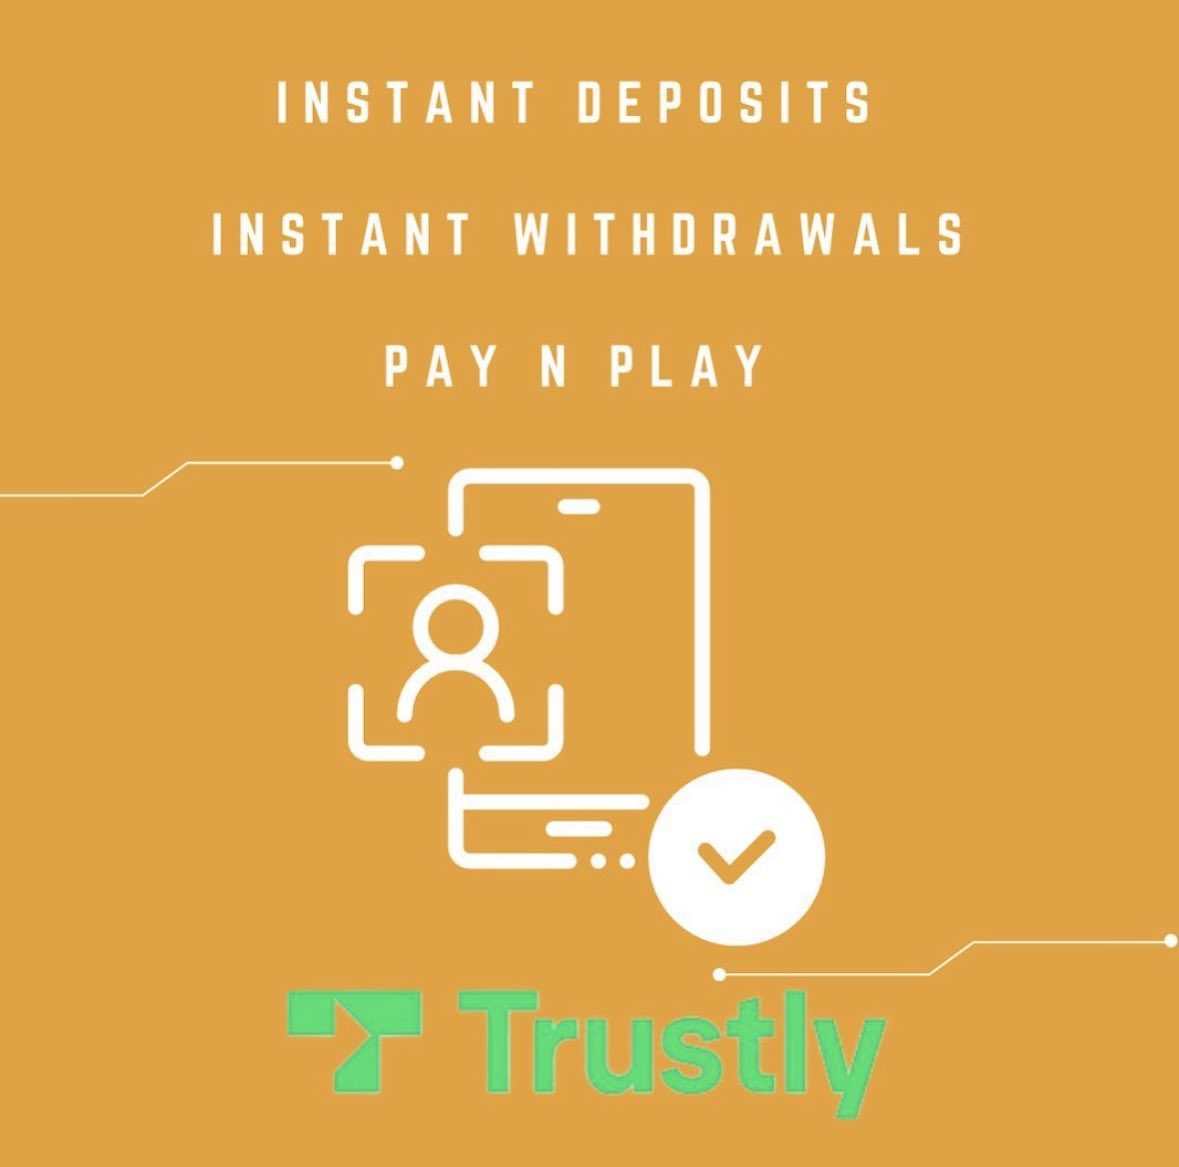 Trustly enables us to provide fast and easy-to-use biometric payment methods in a secure manner for our customers. One of many easy payment solutions when you play with Vegas Moose 🎰 
18+. Terms Apply

#paywithtrustly #safepayments #trustly #casinowithdrawls